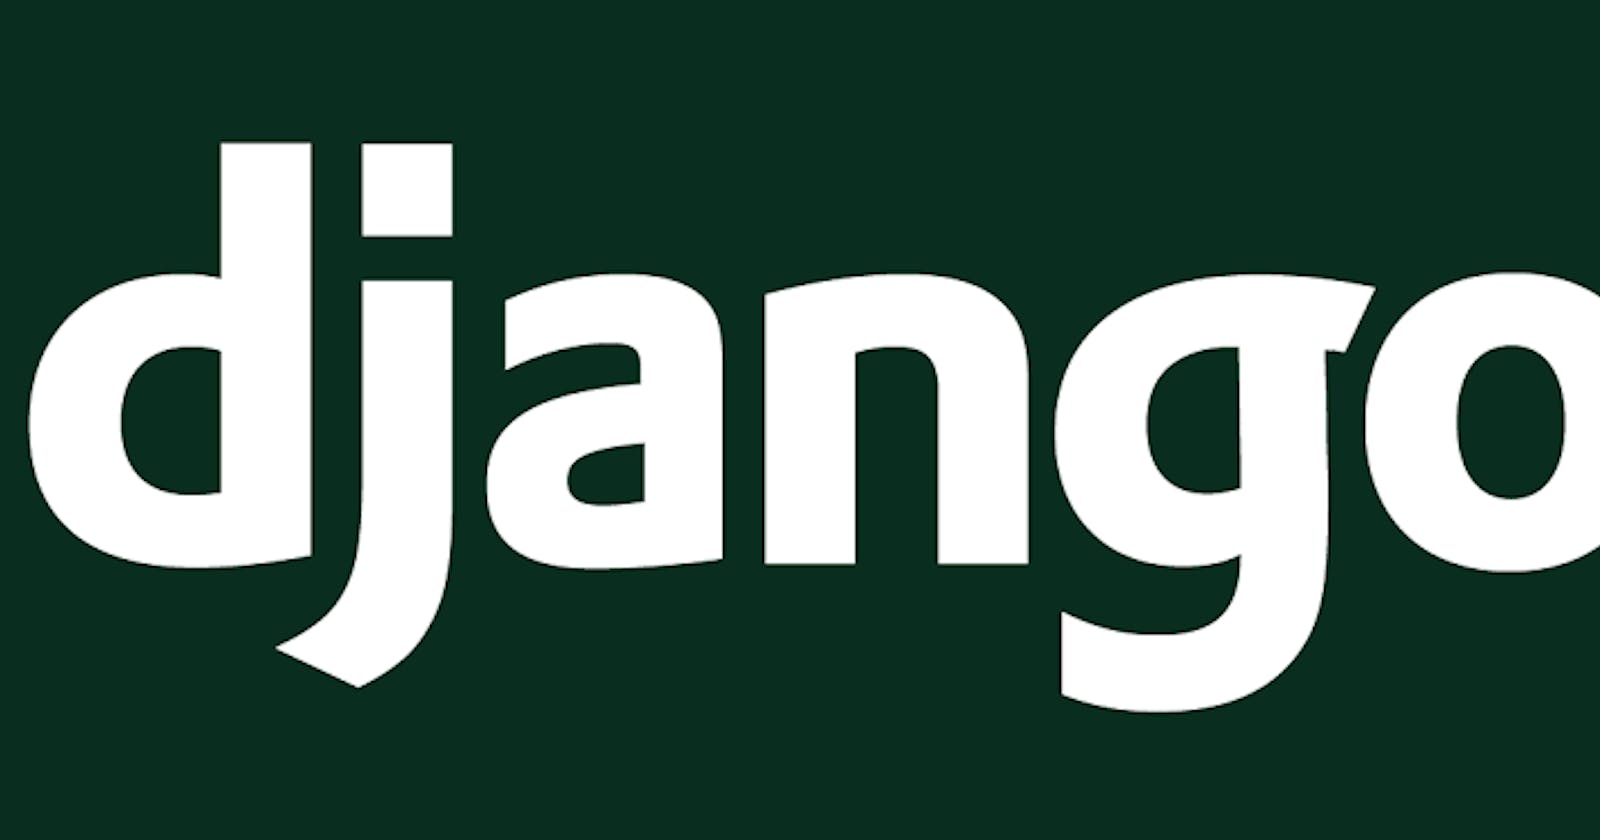 How to create multiple independent admin sites in Django